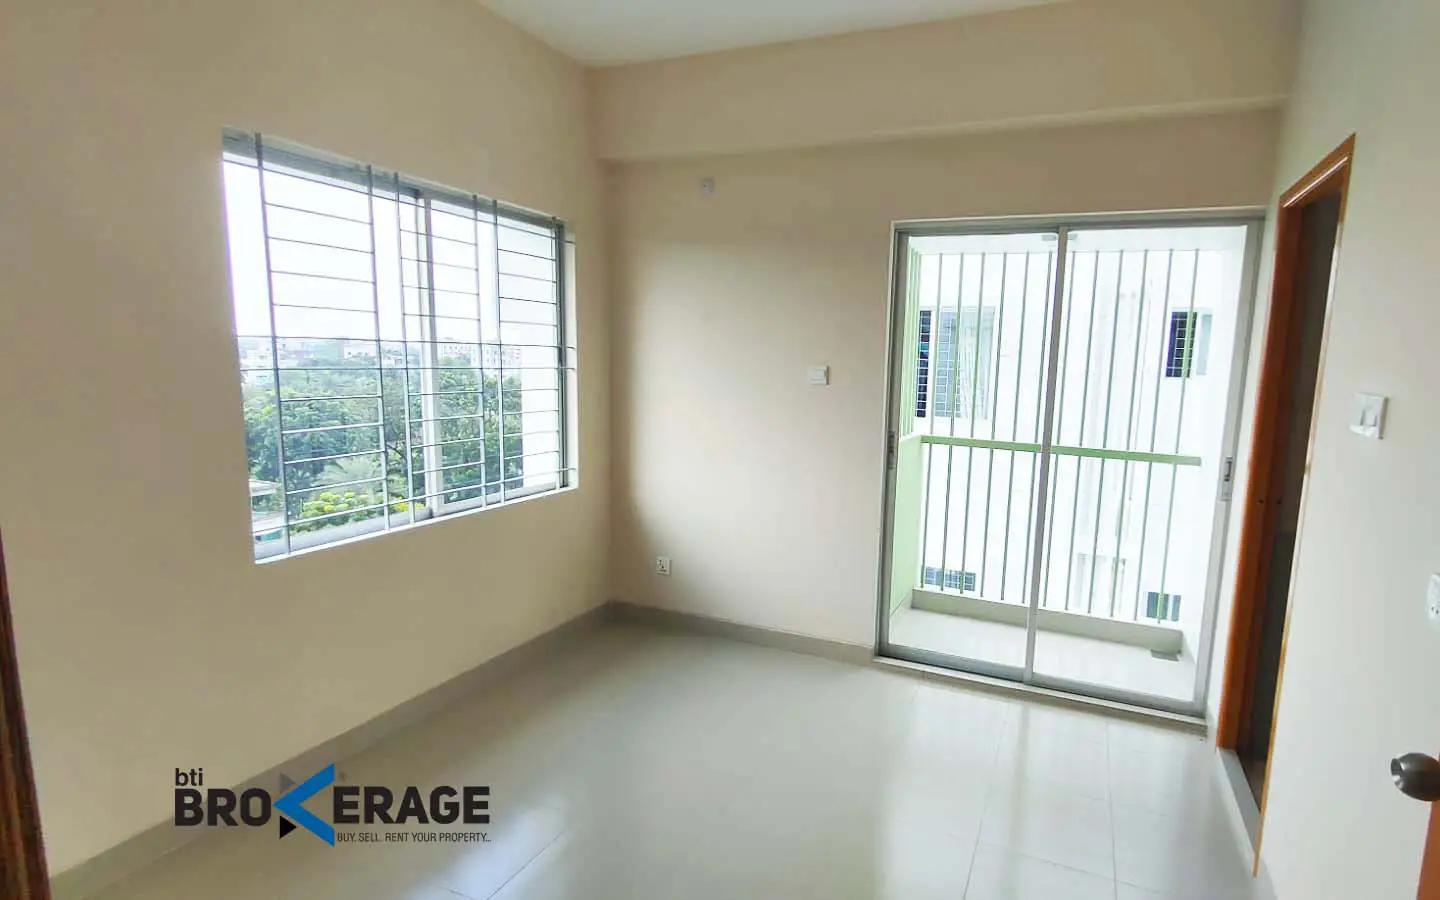 Ready flat for sale in savar